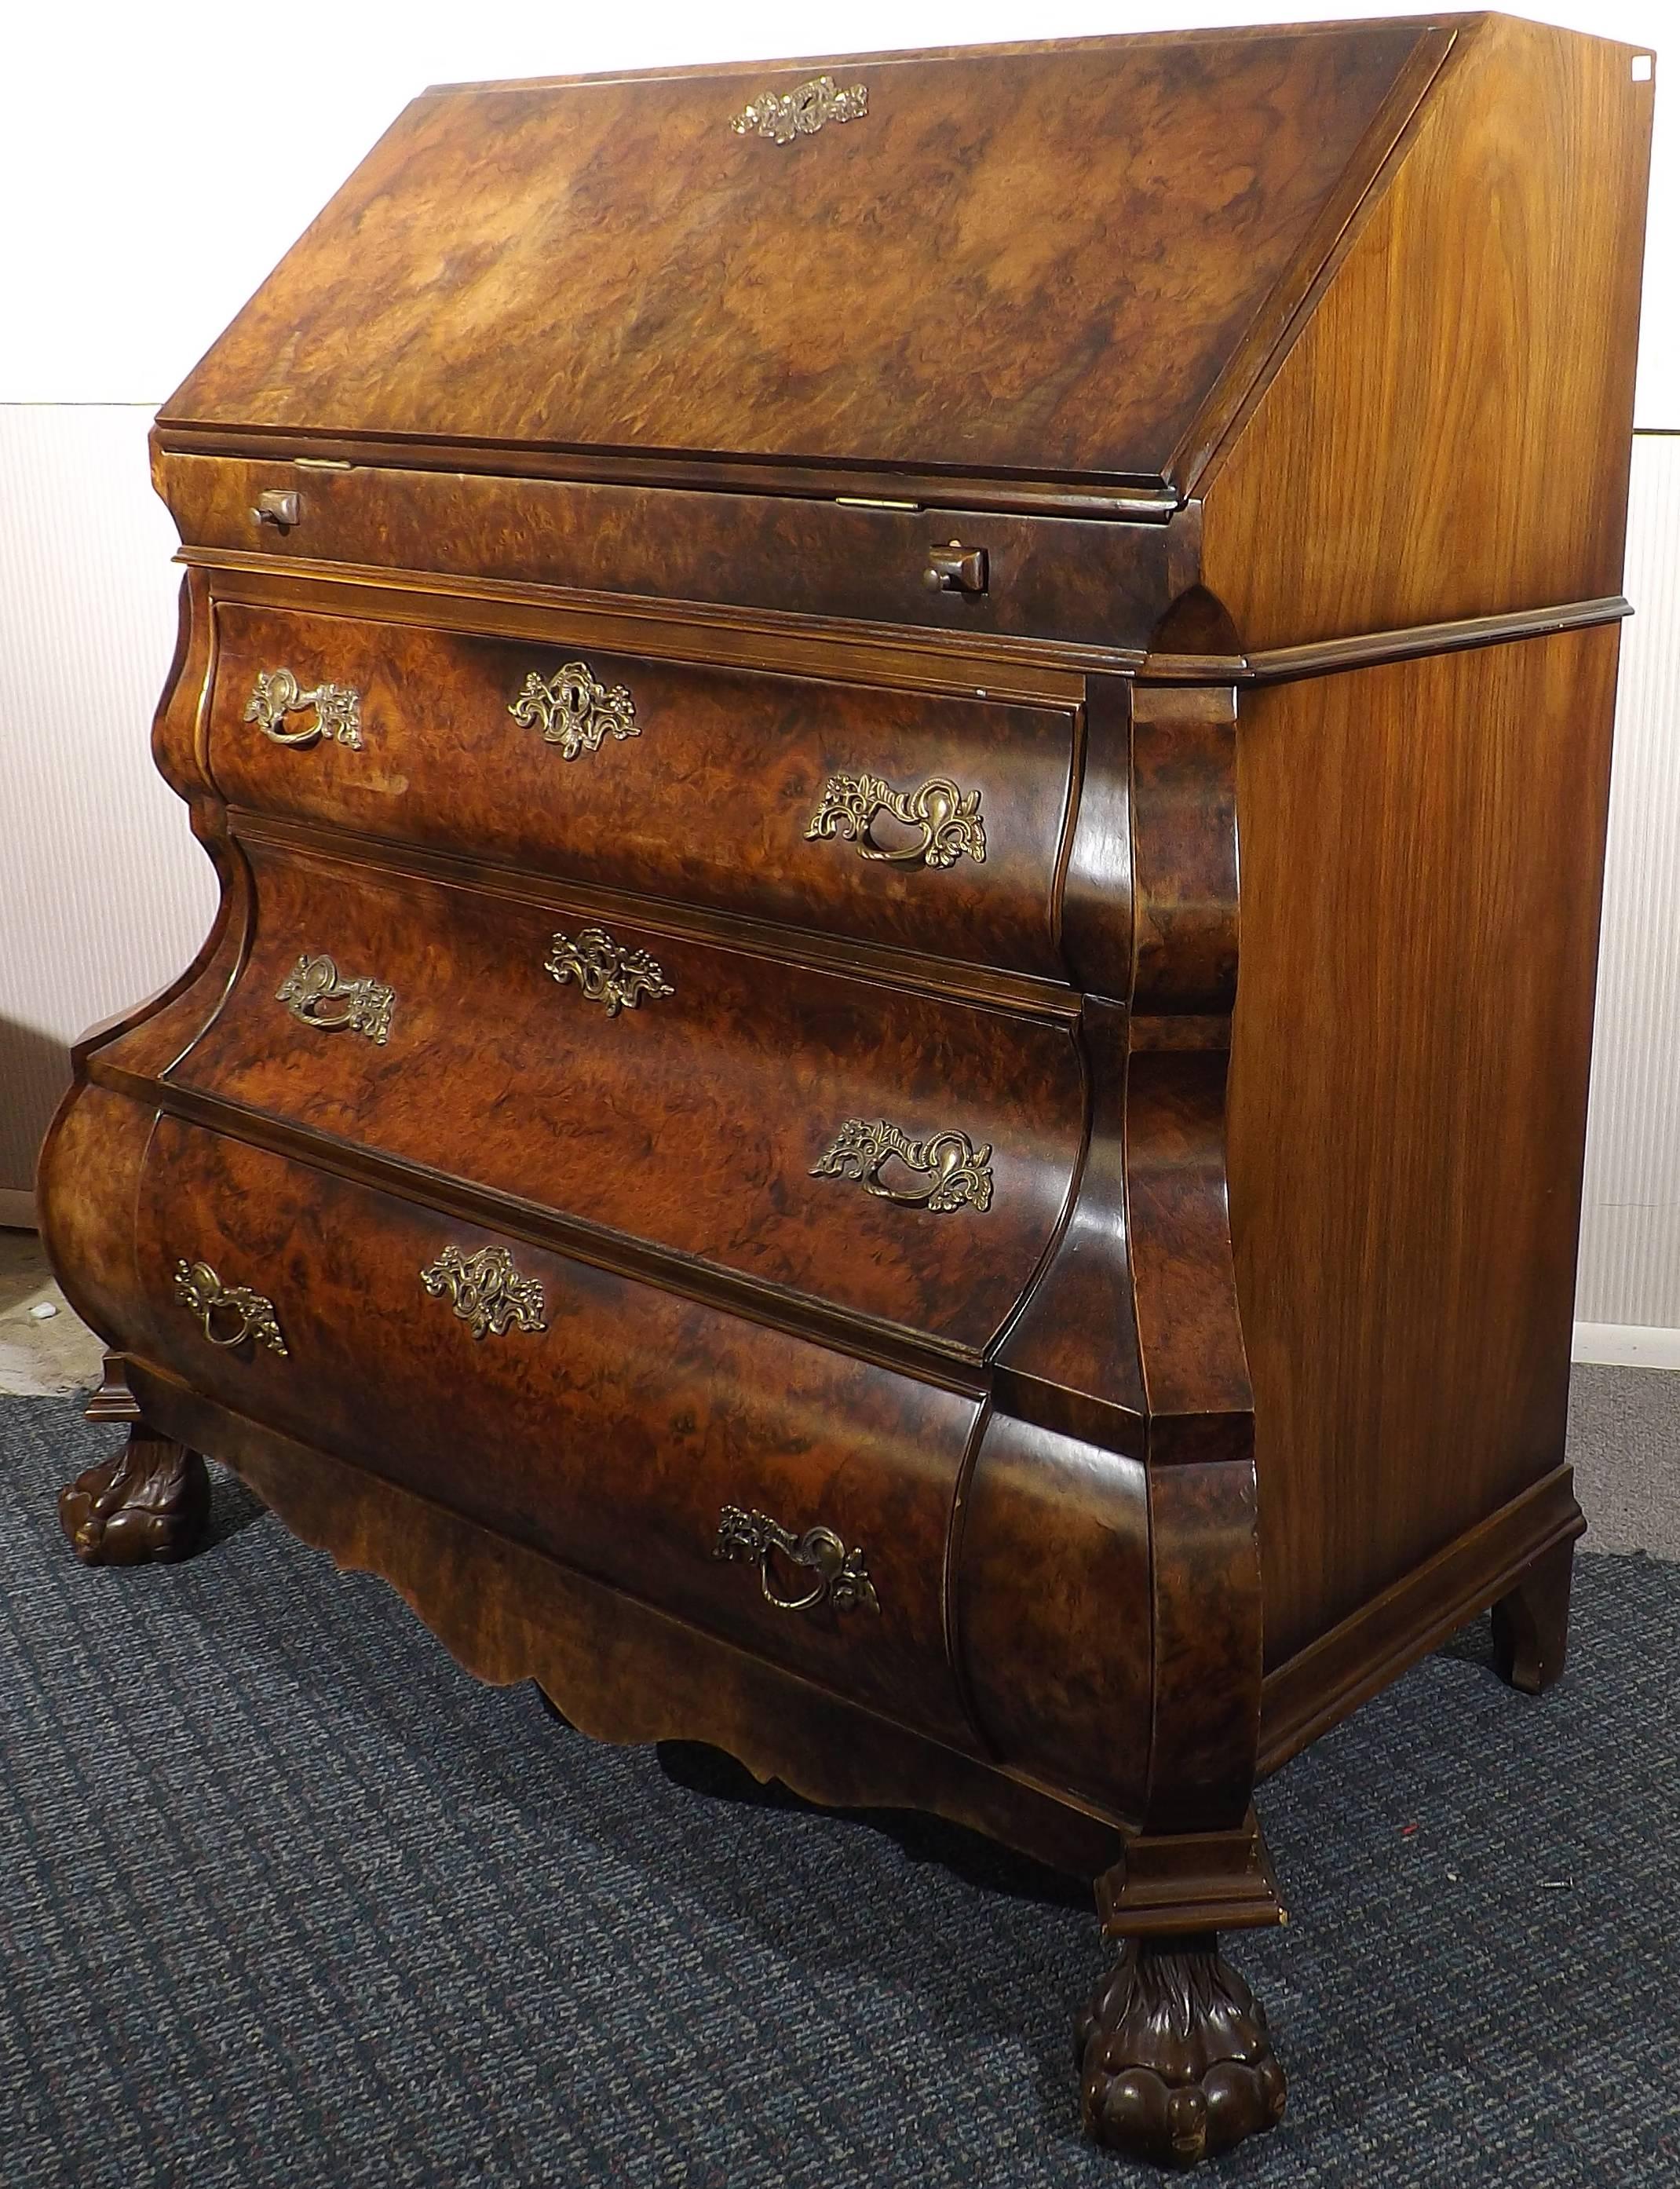 A magnificent Dutch bombe drop-front desk done in walnut burl on claw and ball feet. Beautiful marquetry work and with two 'secret' compartments disguised as books. Two pull-out arms support the fold down writing surface, which can be closed and